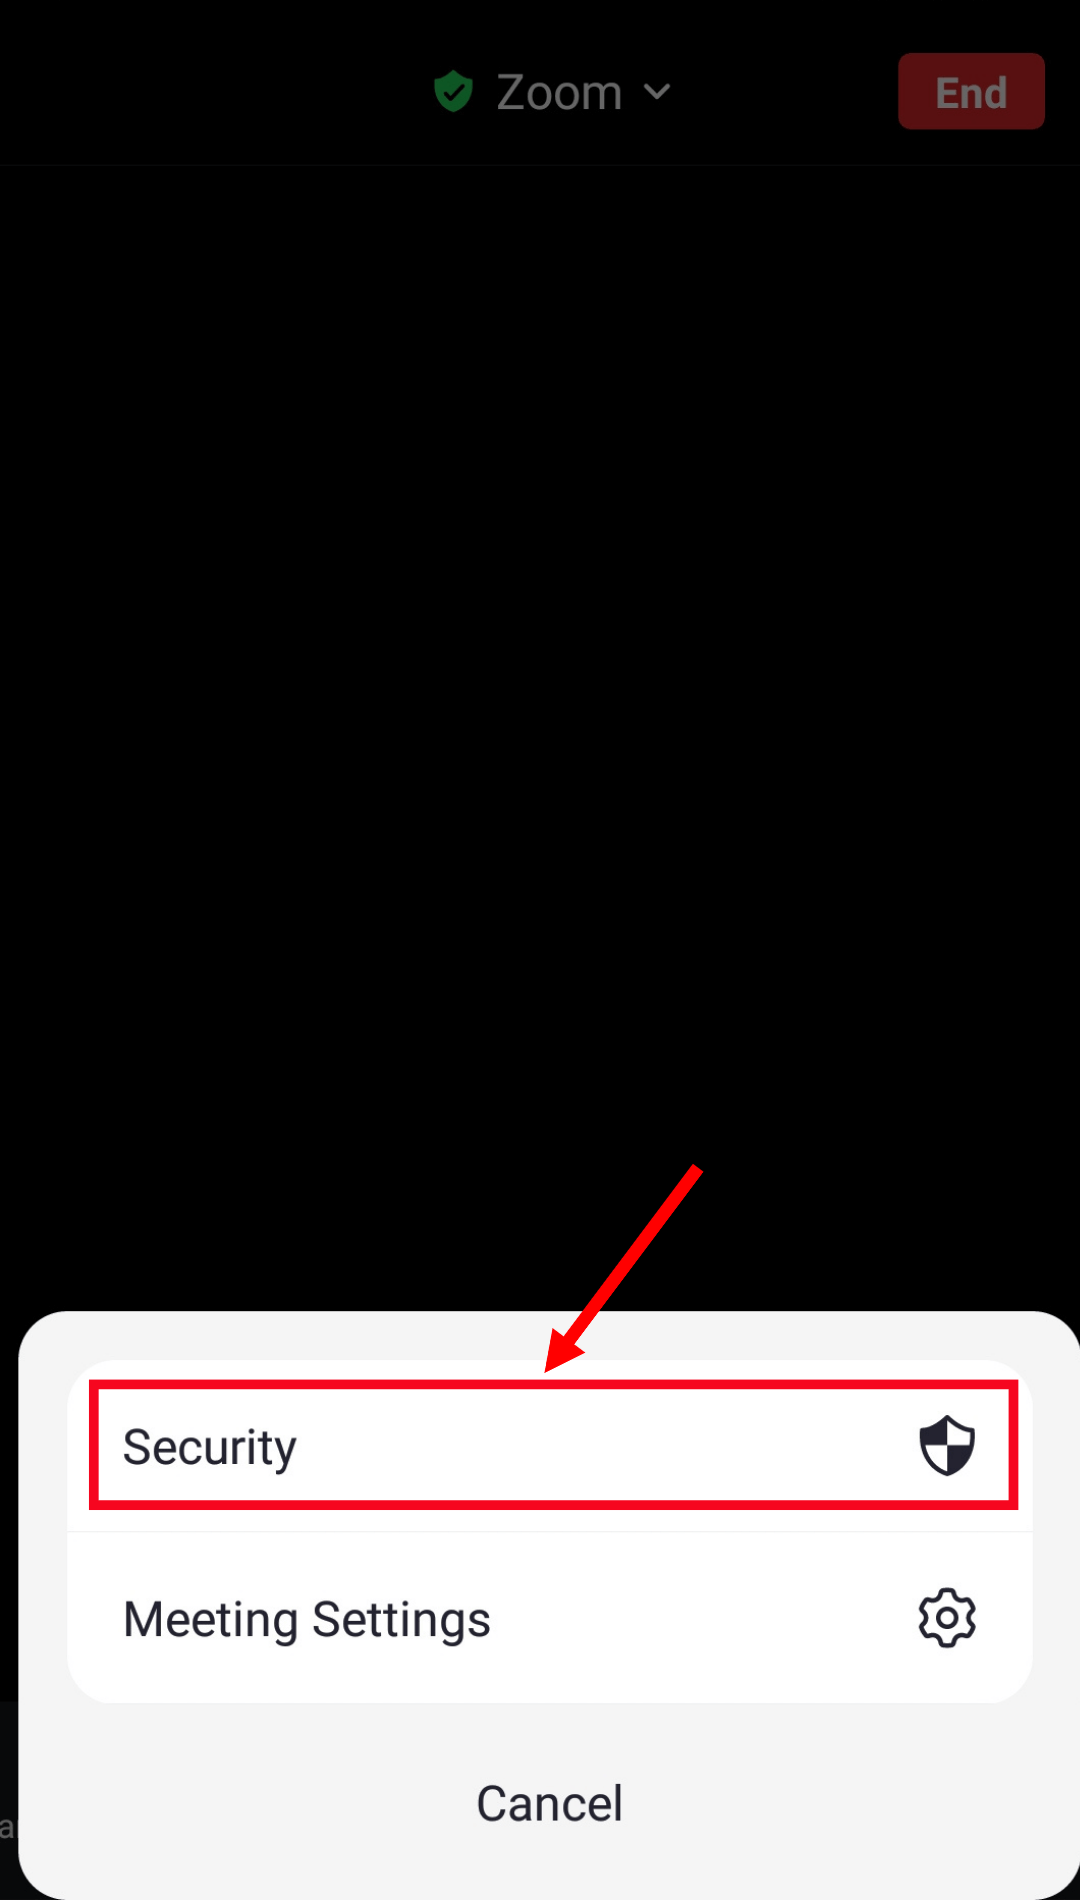 select security to open new page